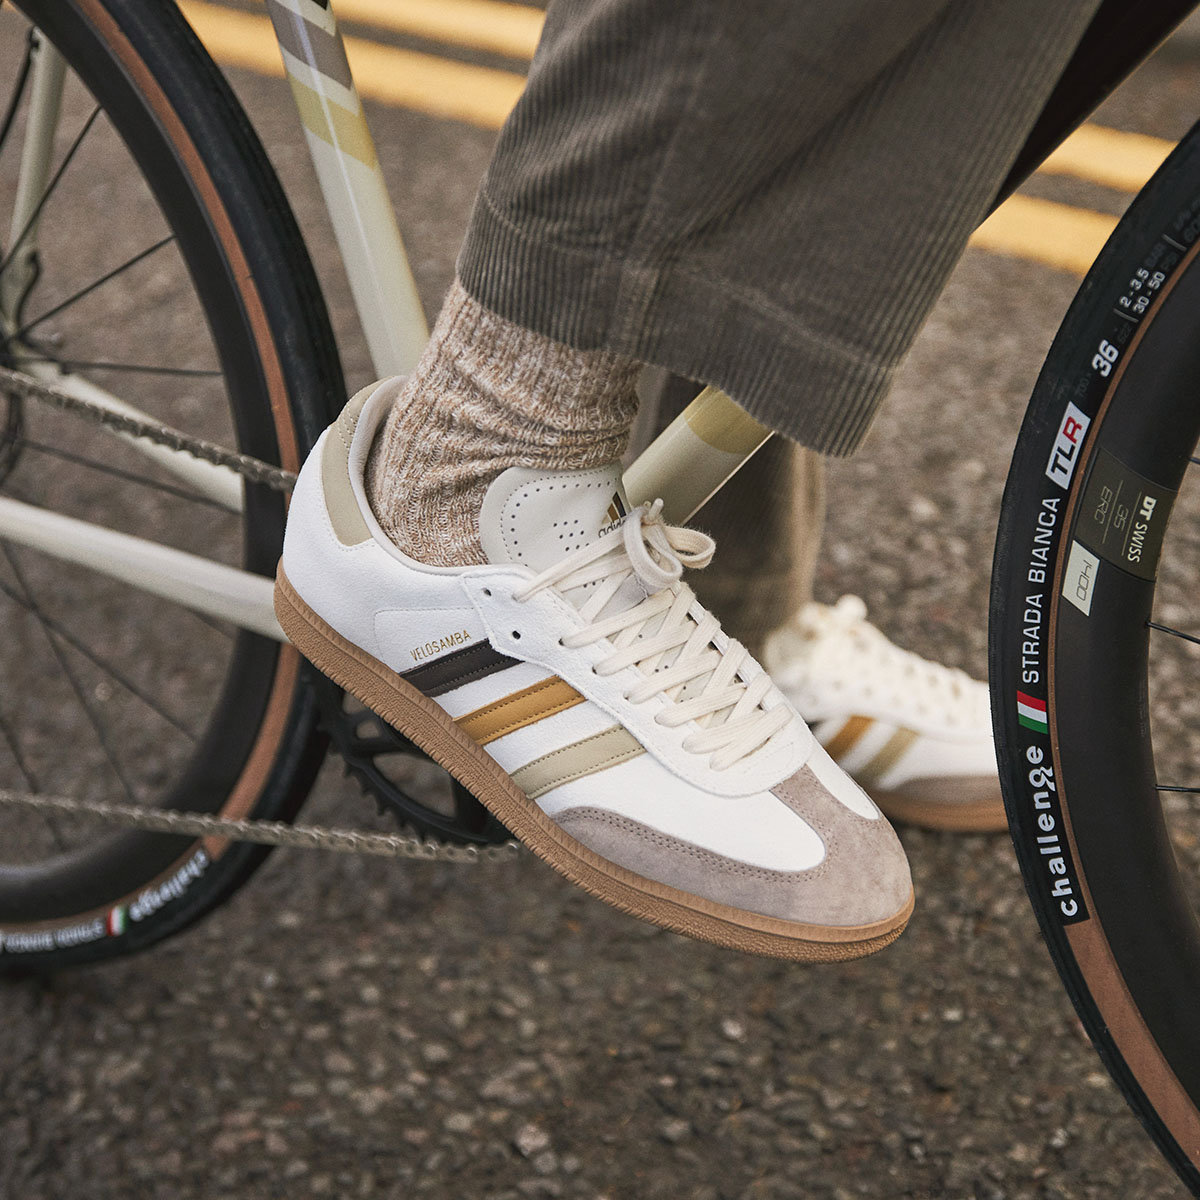 luchthaven Haas Ass END. & adidas Reveal Velosambas "Social Cycling" Collab